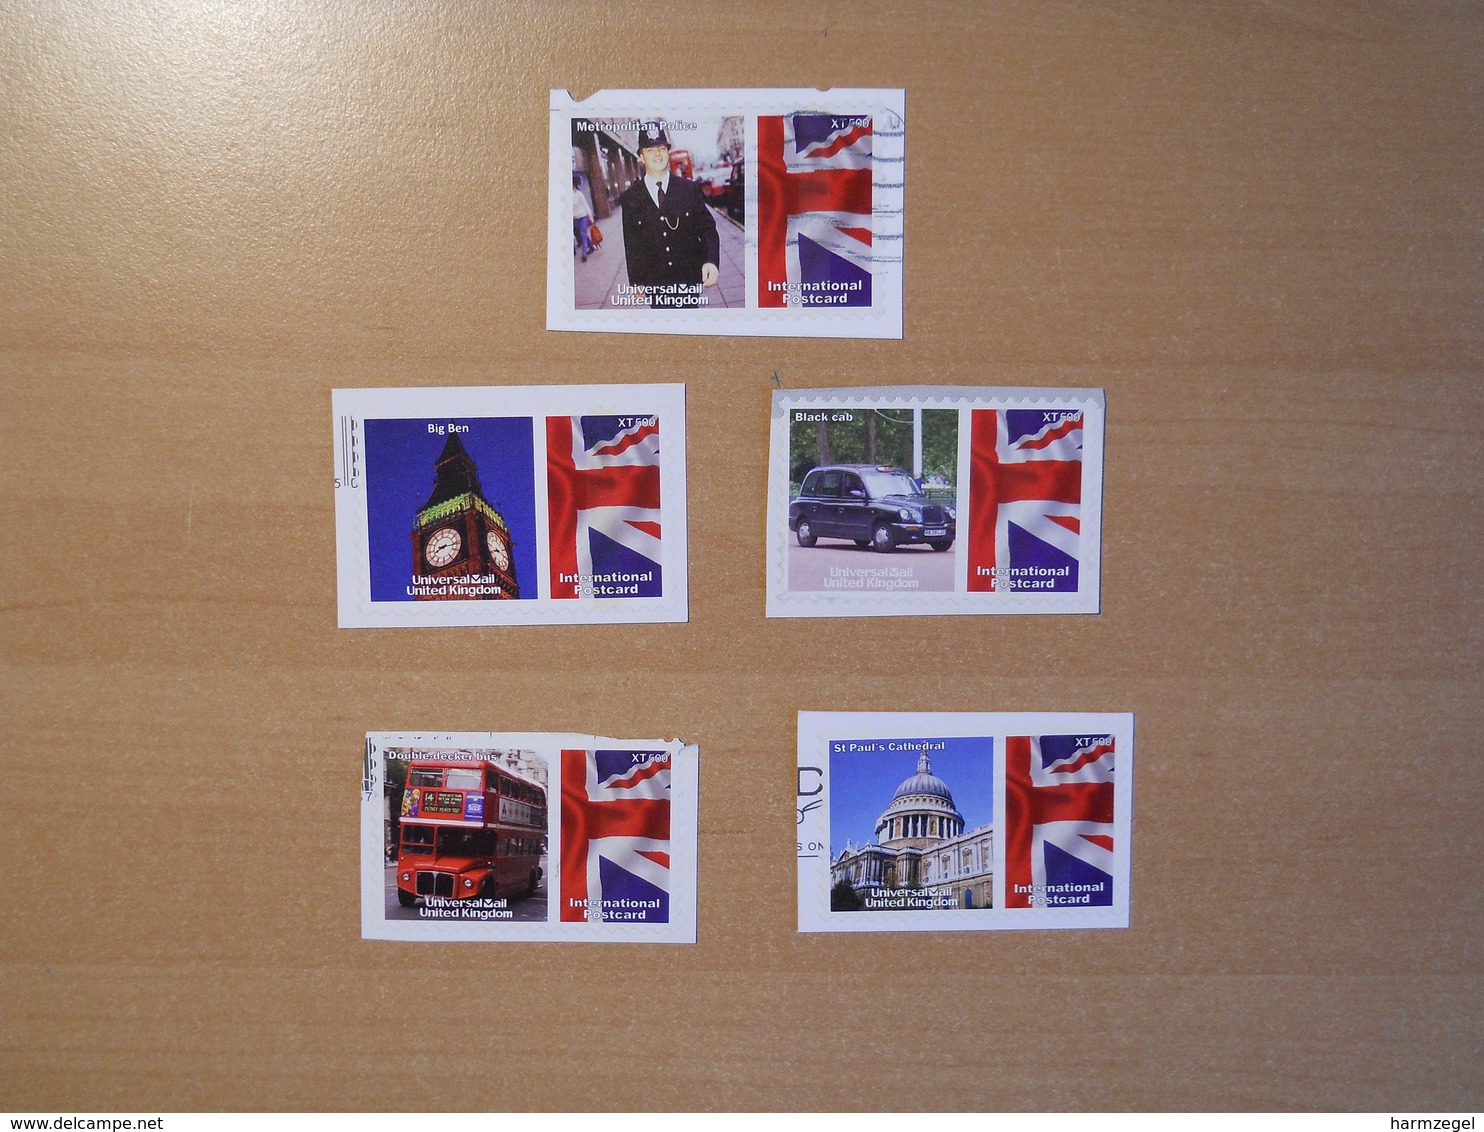 London Black Cab, Taxi, Police, Big Ben, St. Paul's Cathedral, Double Decker Bus - Universal Mail Stamps